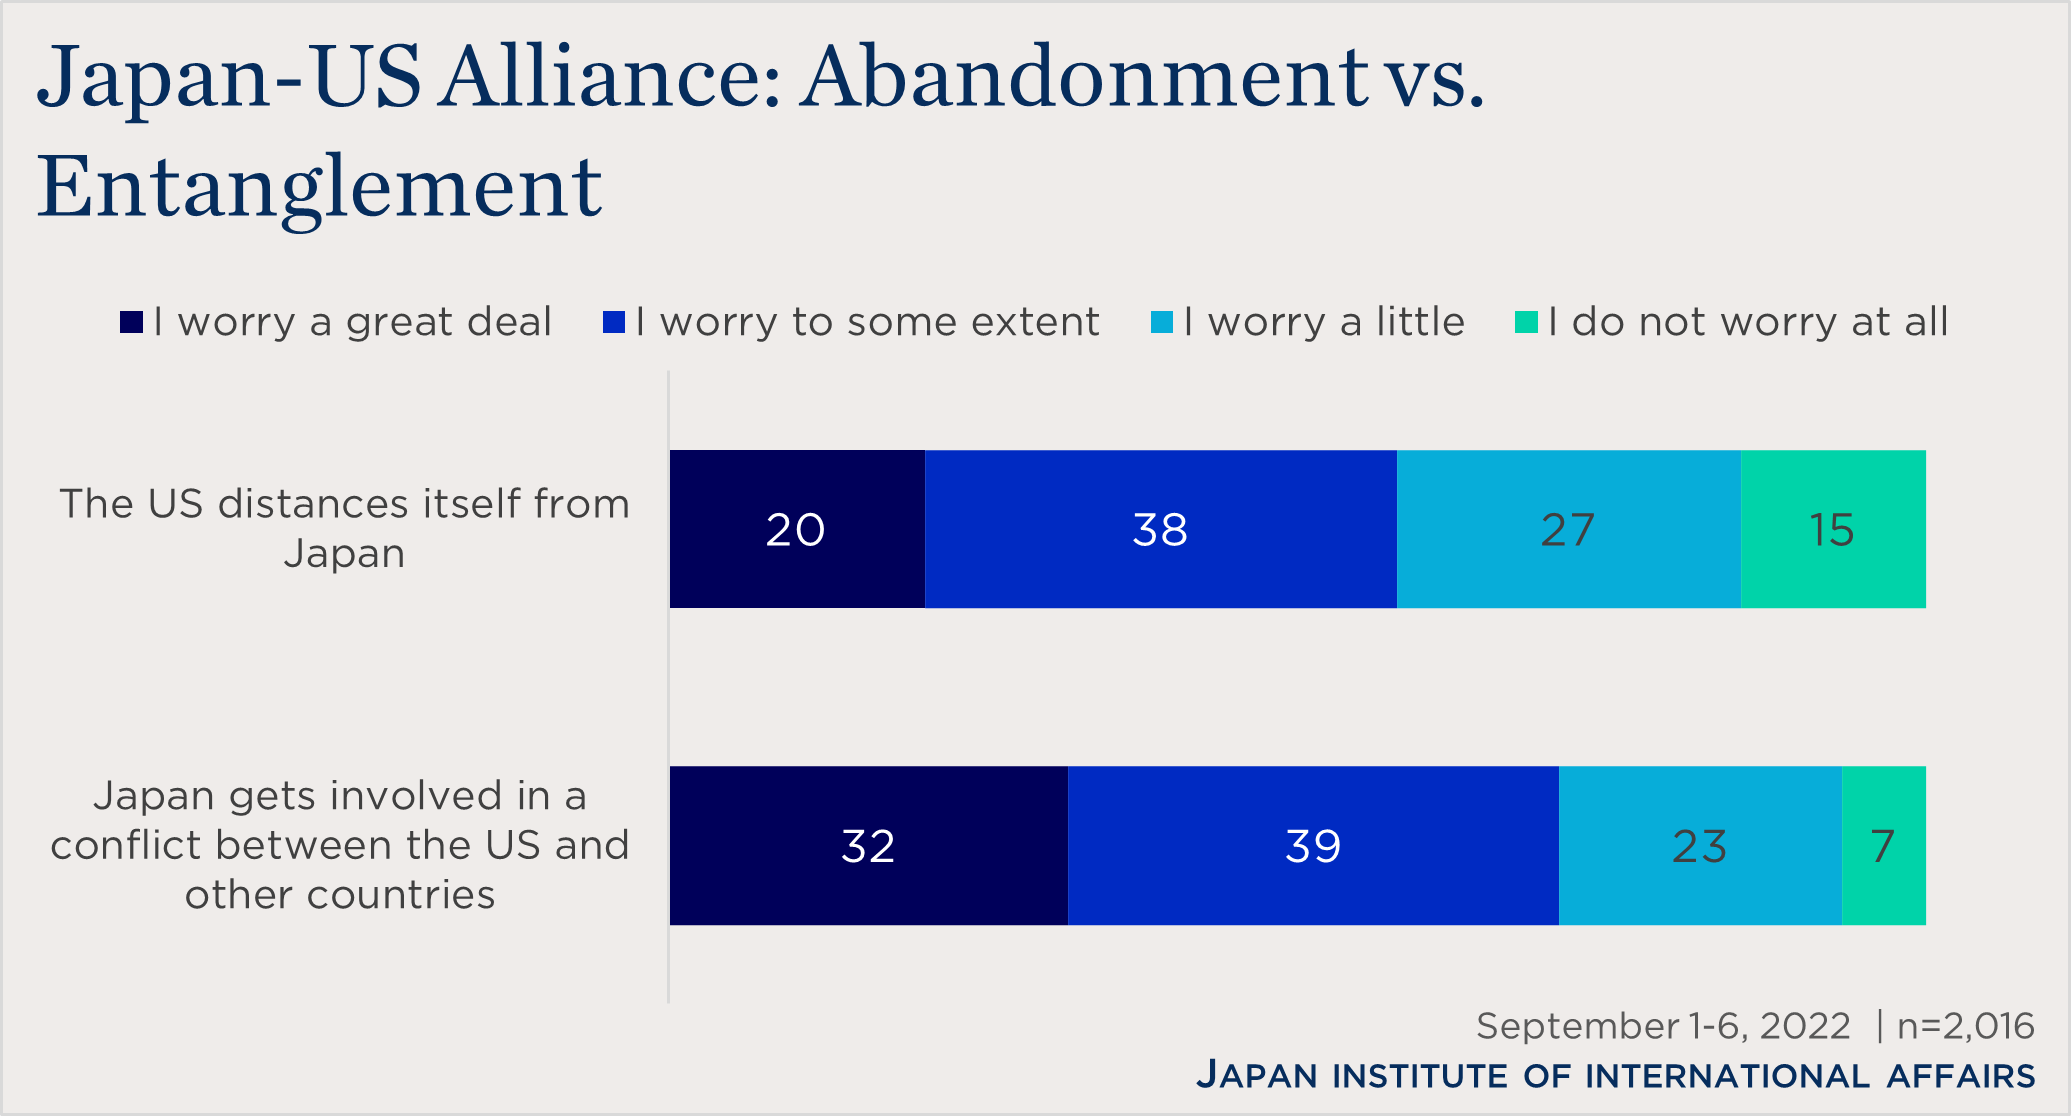 "bar chart showing views on US-Japan alliance"